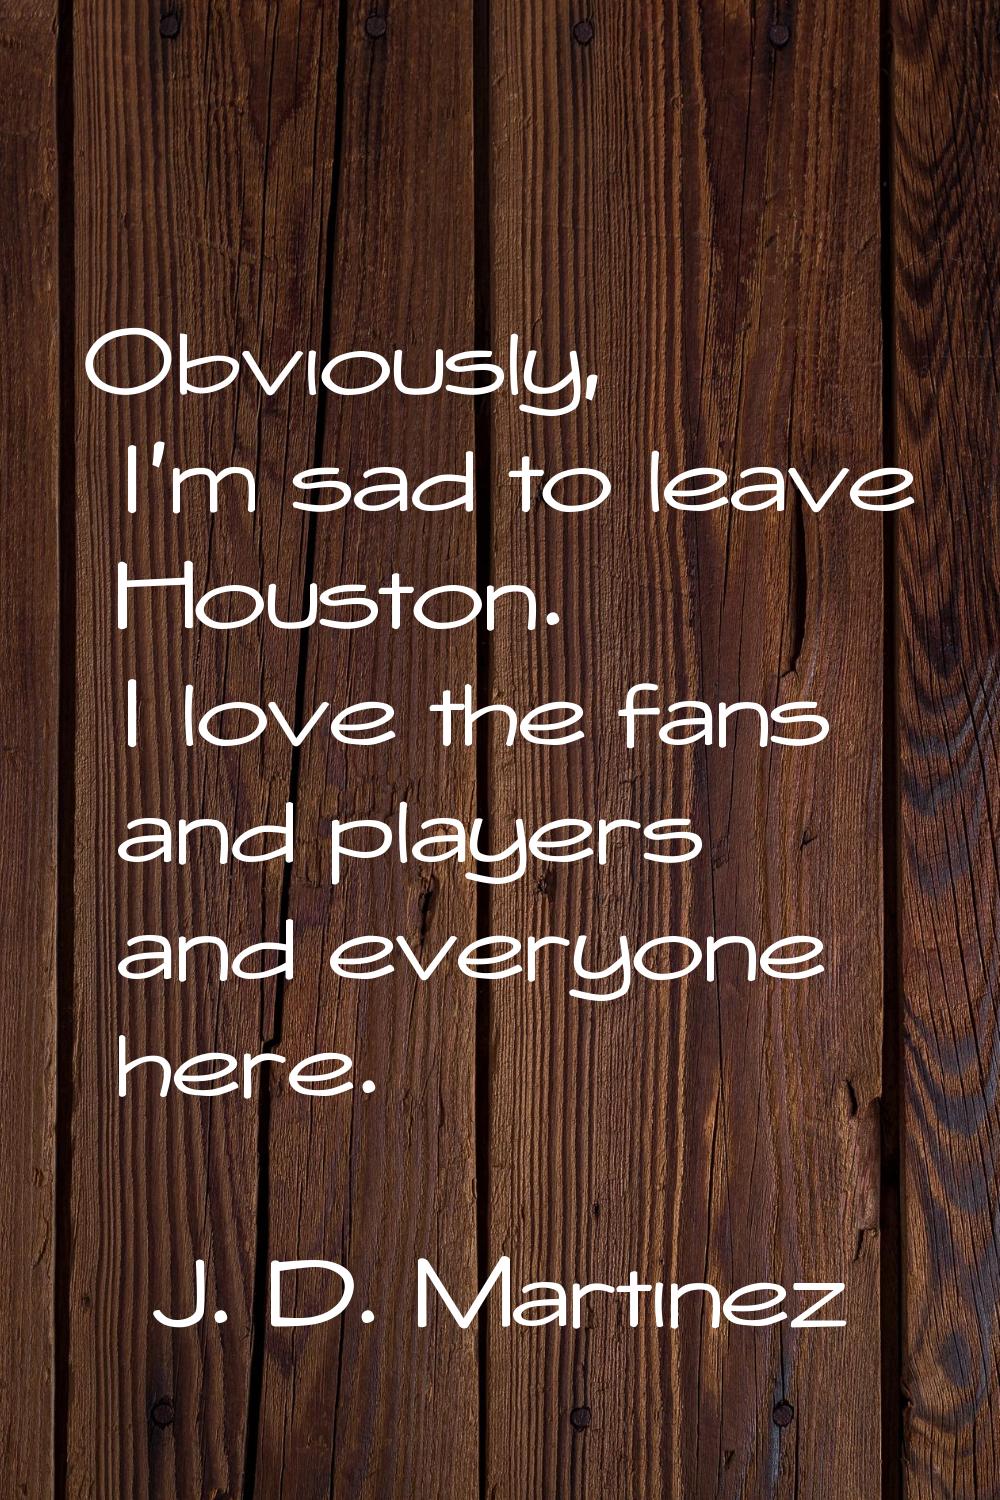 Obviously, I'm sad to leave Houston. I love the fans and players and everyone here.